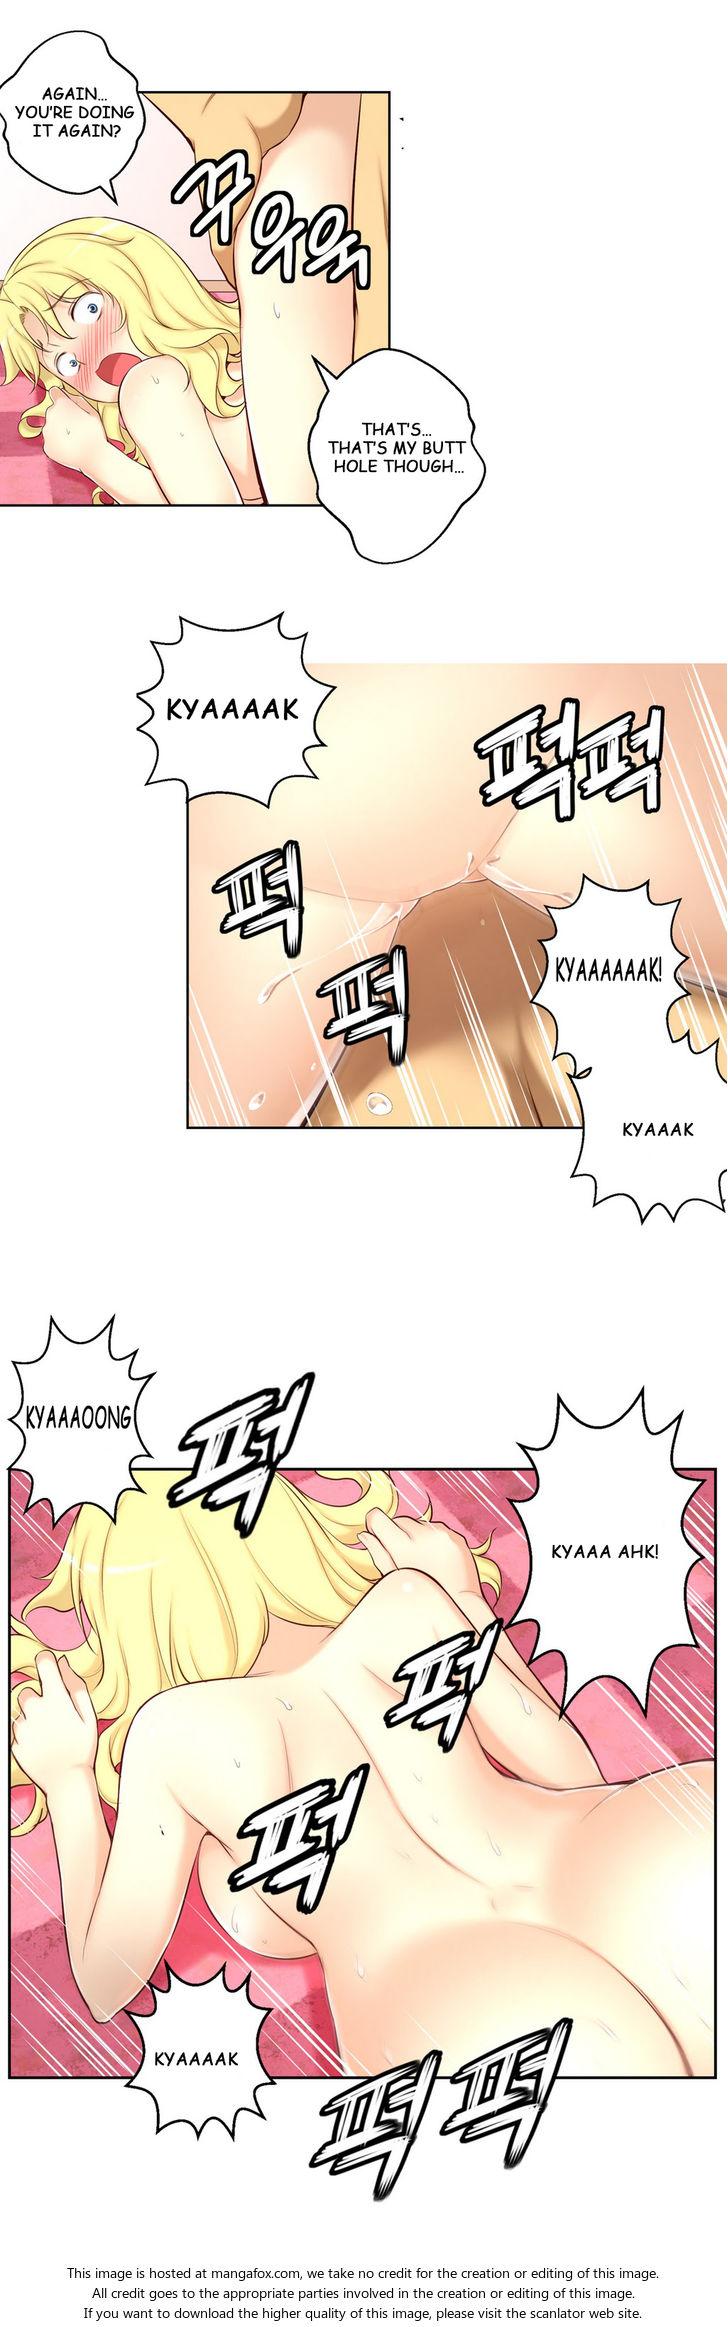 [Donggul Gom] She is Young (English) Part 1/2 648